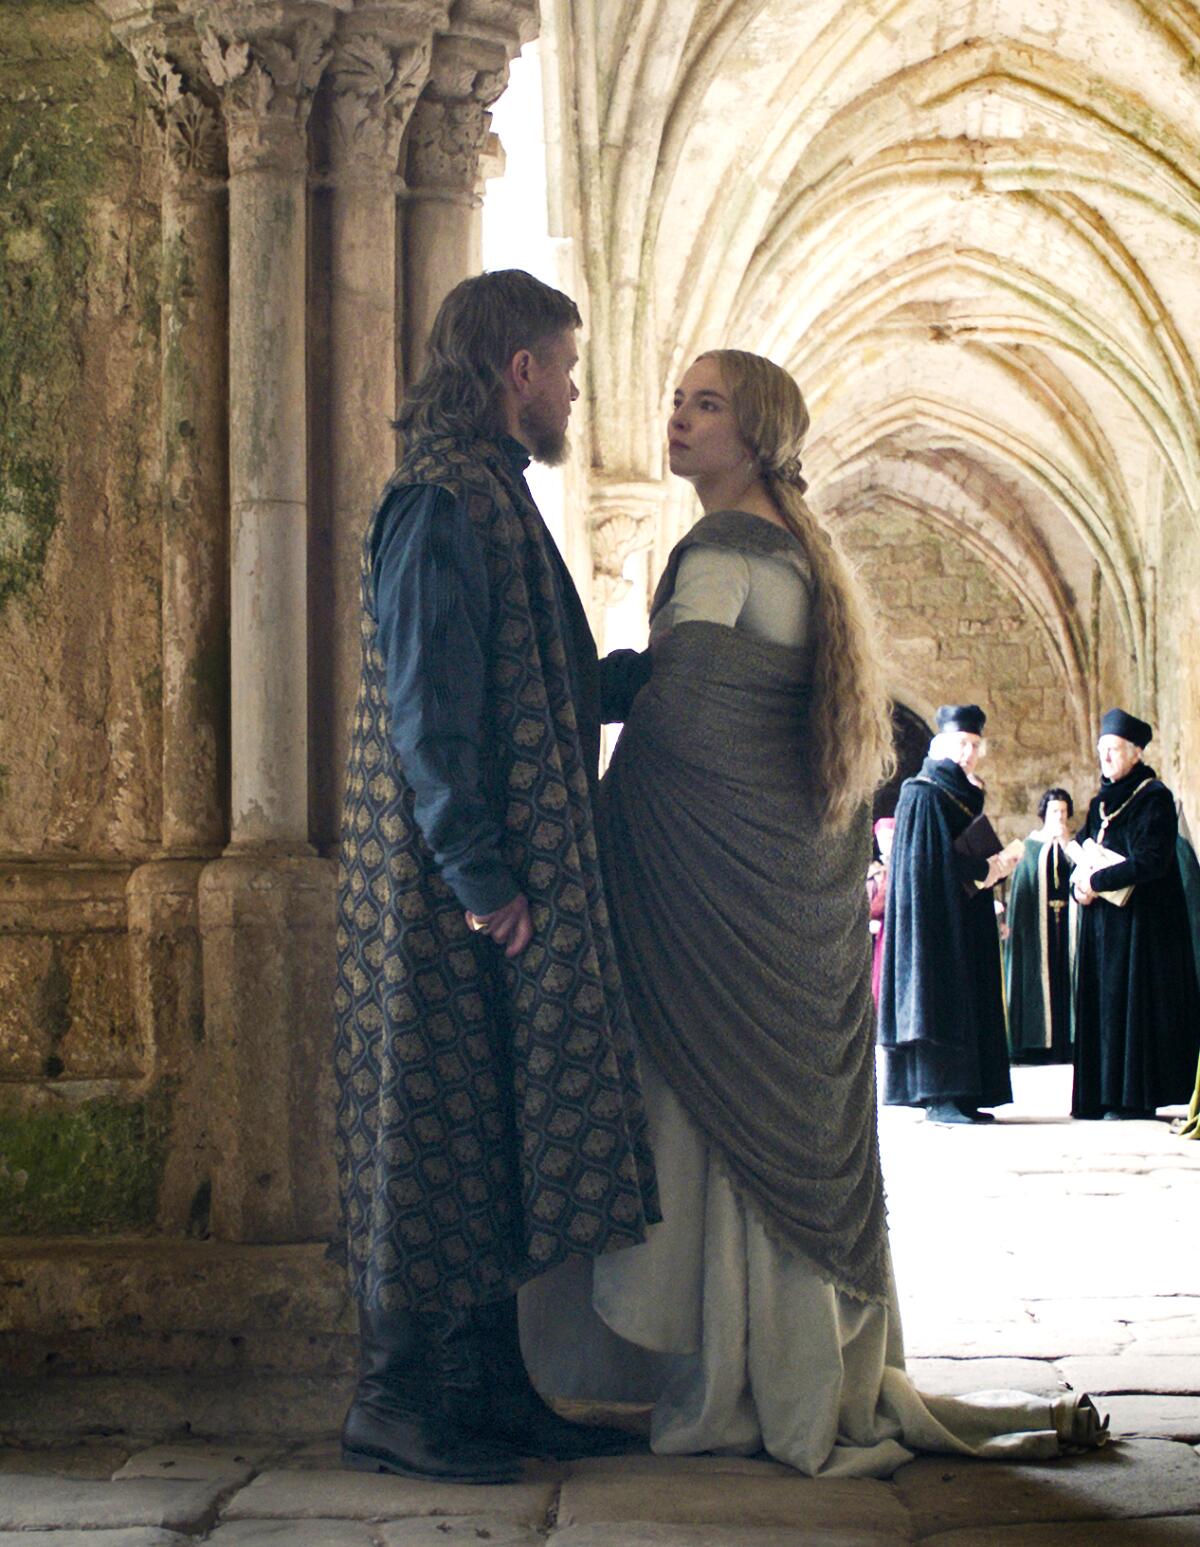 Matt Damon as Jean de Carrouges and Jodie Comer as Marguerite de Carrouges in medieval period costumes in "The Last Duel."